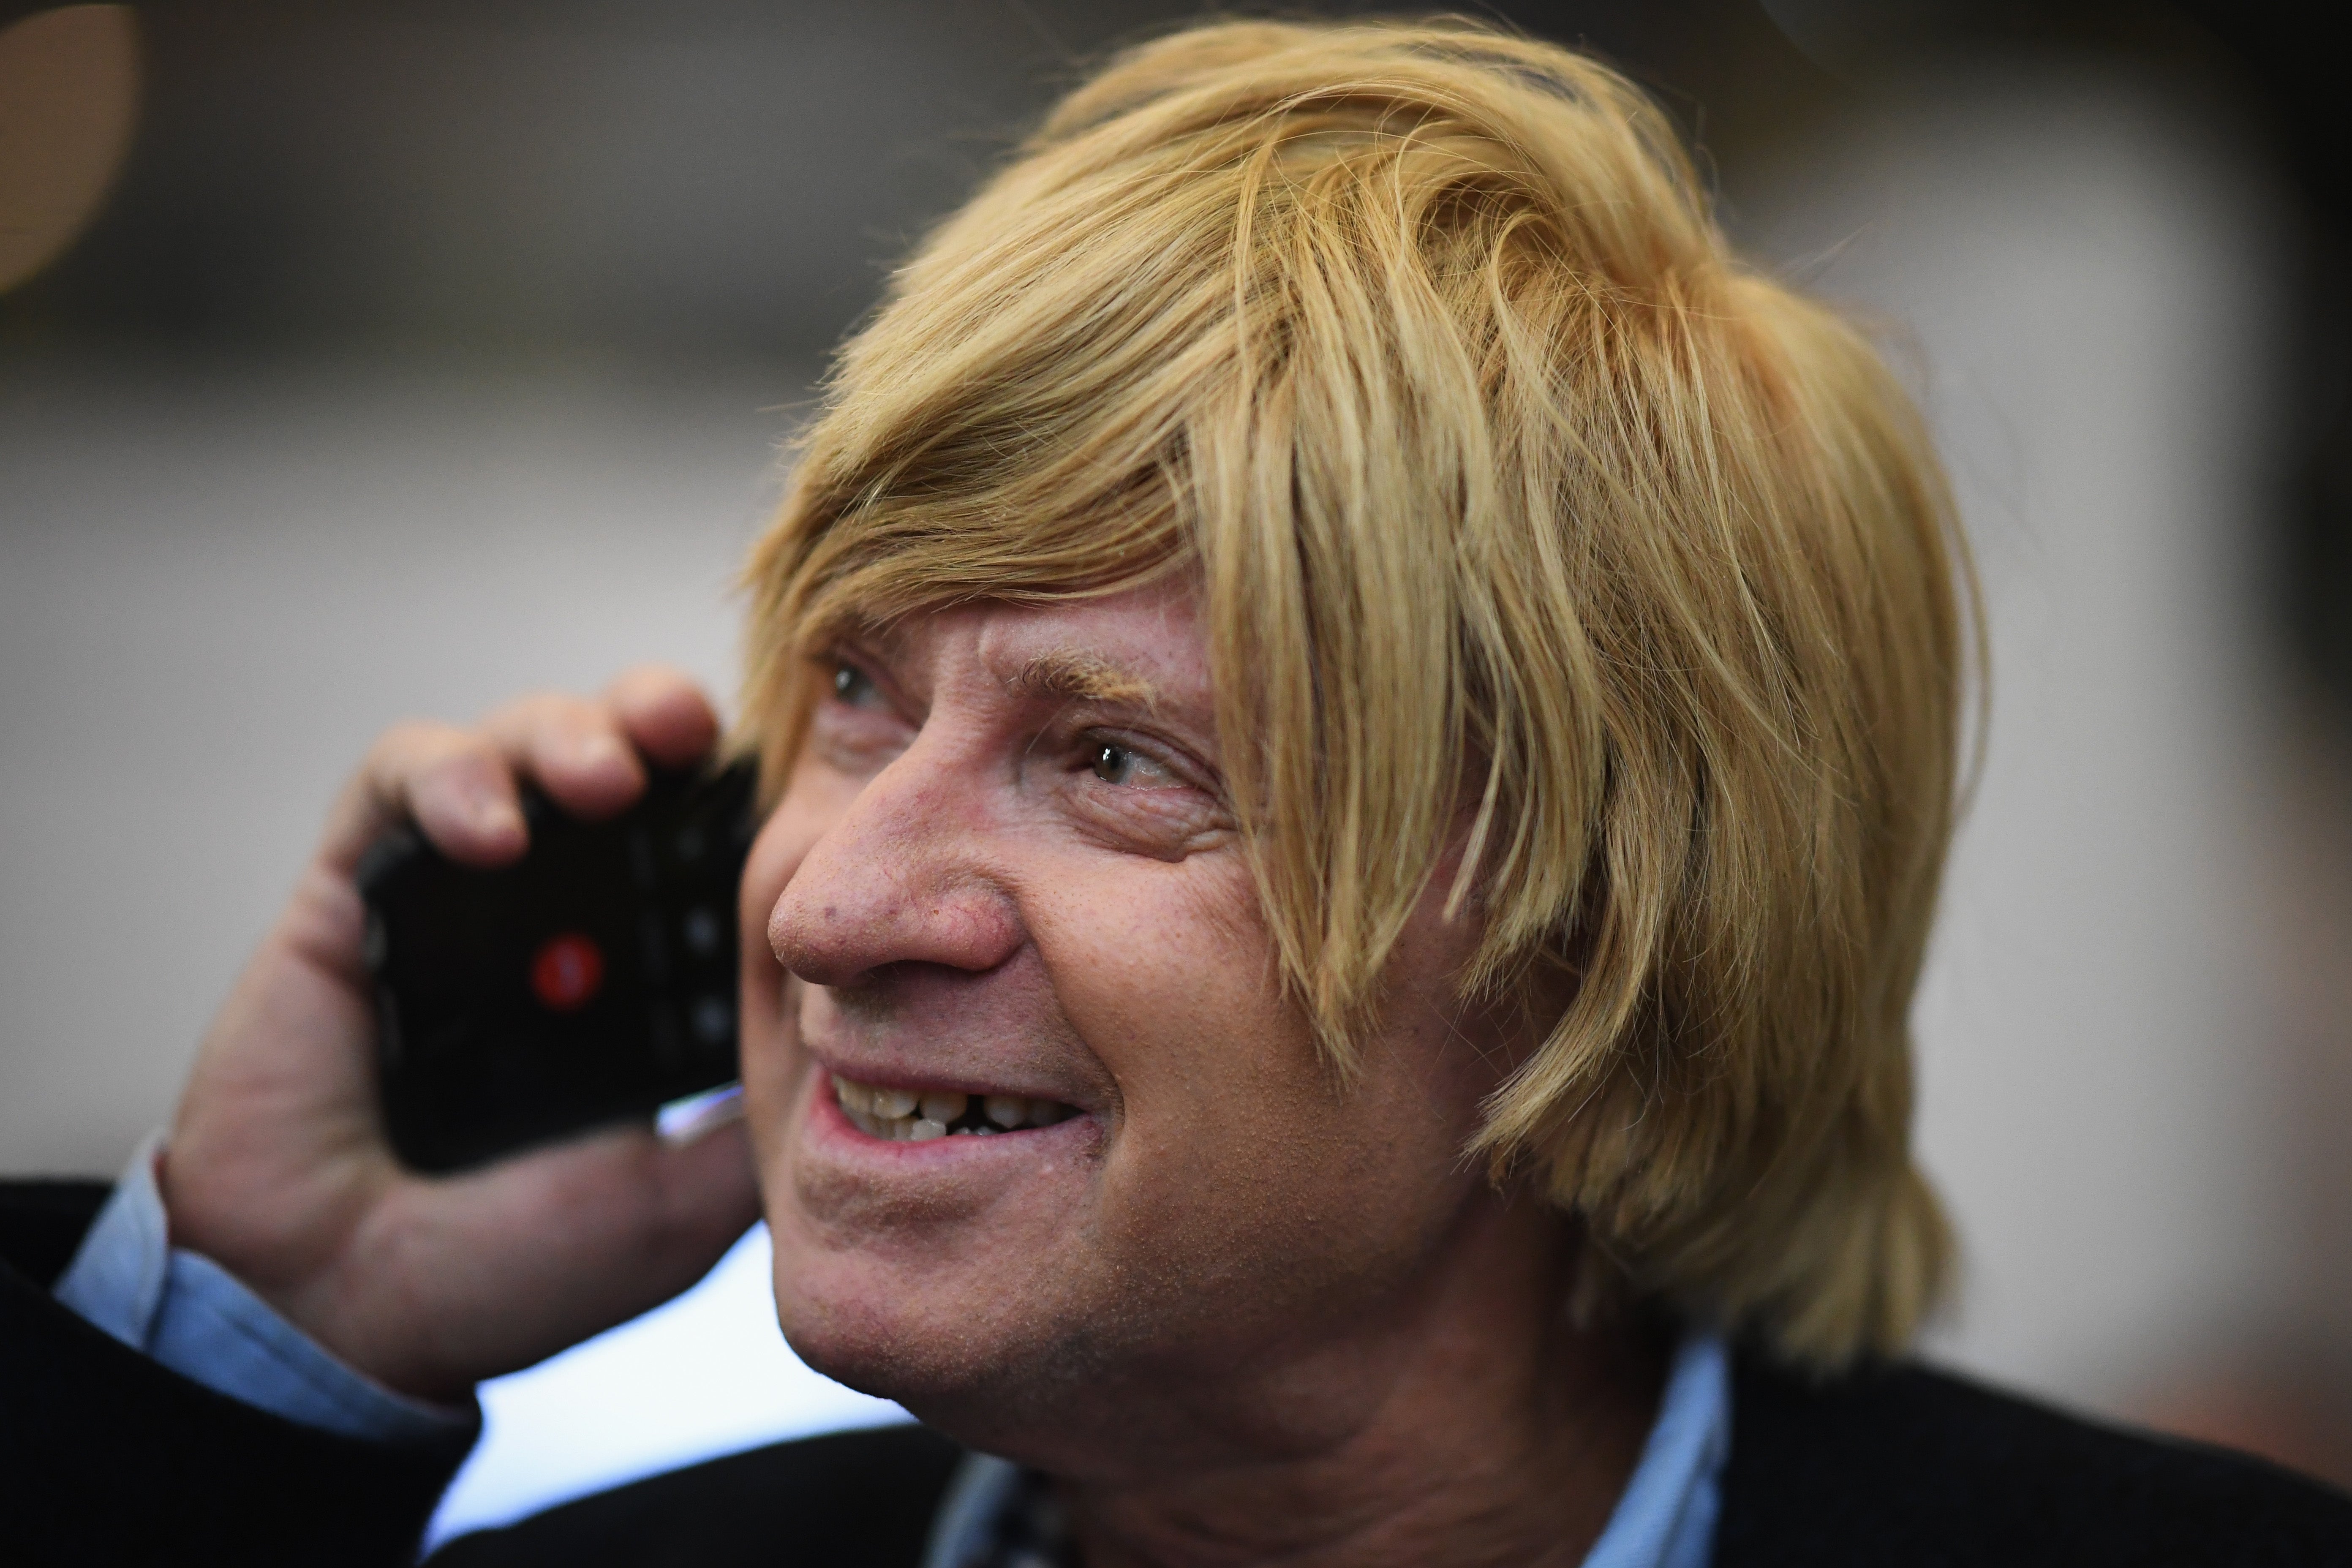 Conservative MP Michael Fabricant defended his colleague Chris Pincher